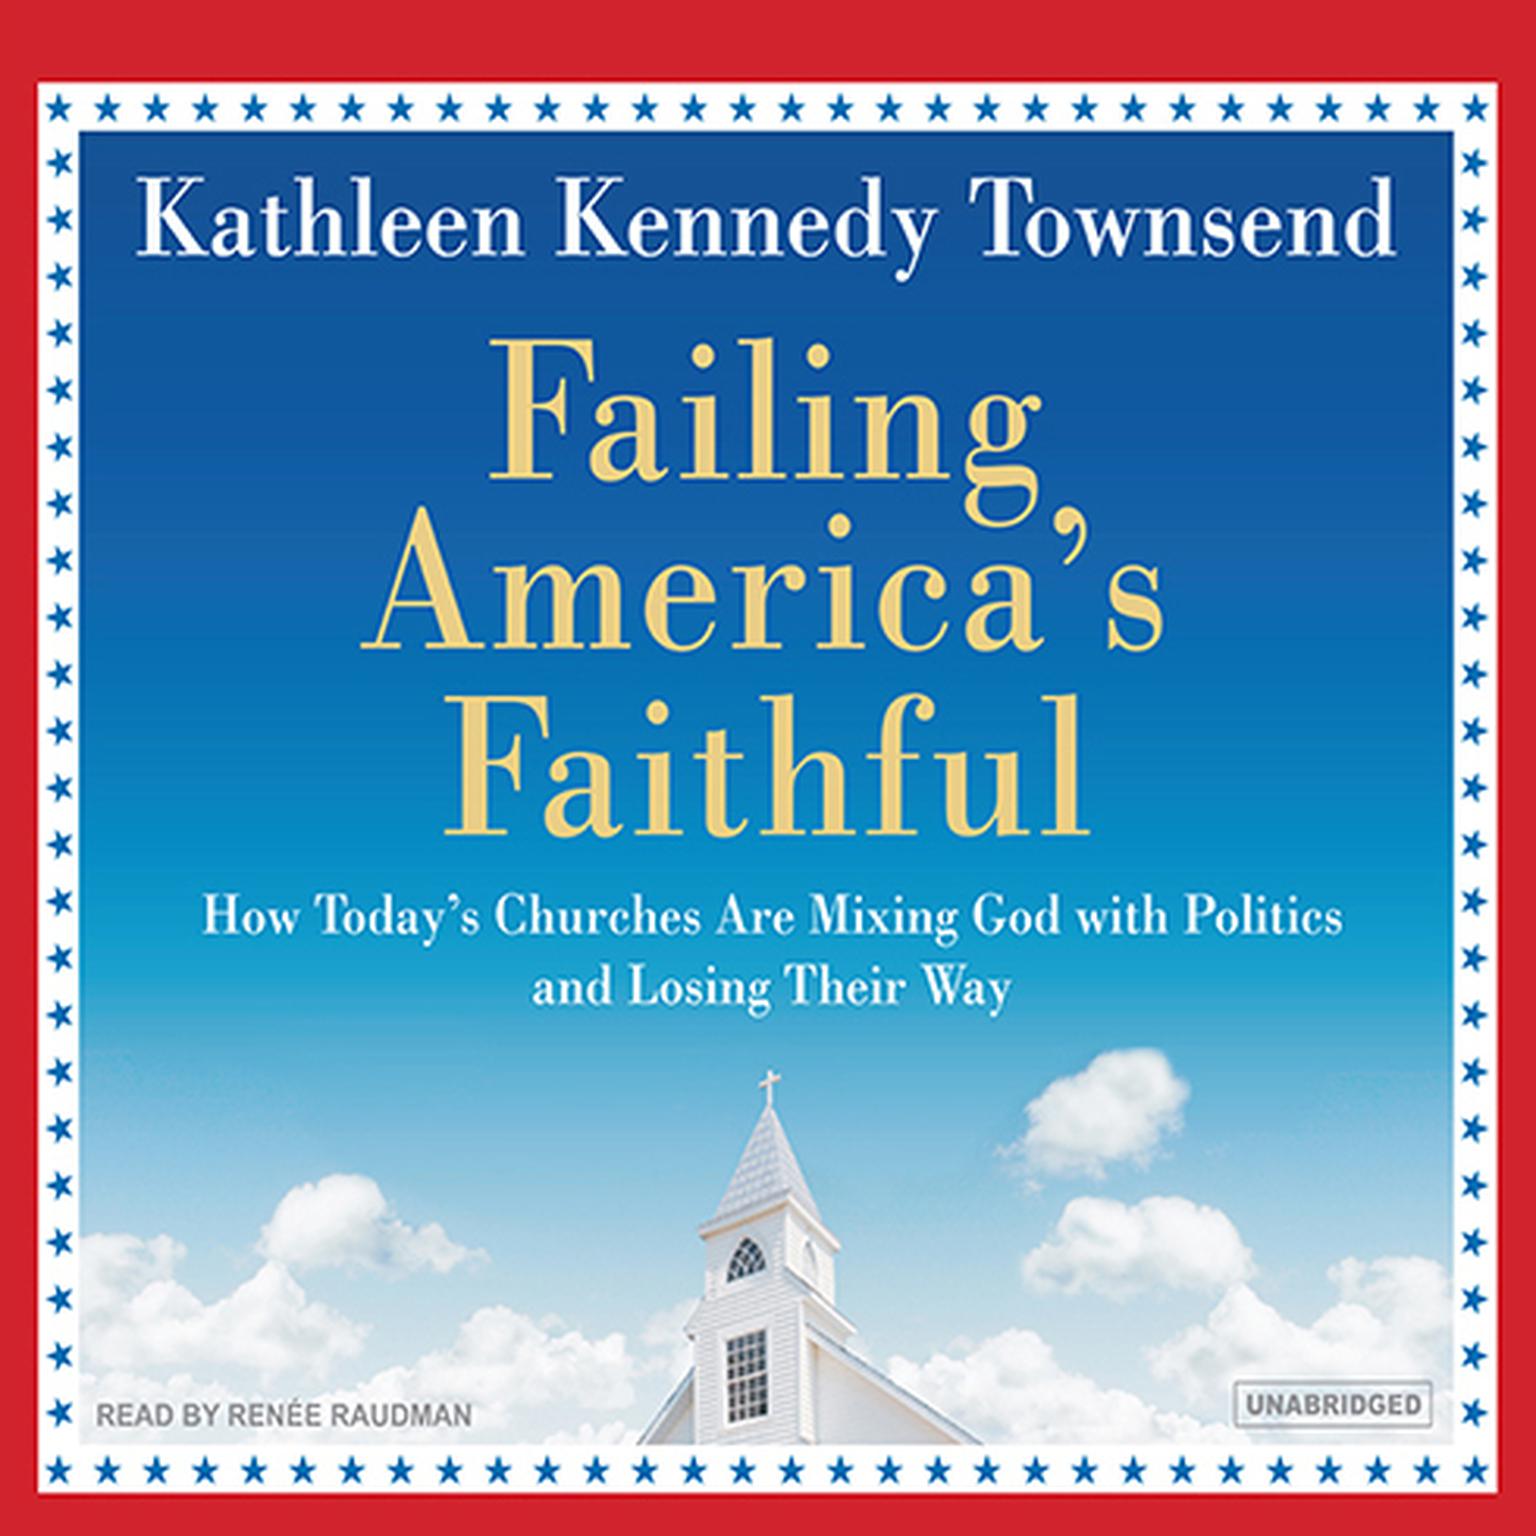 Failing Americas Faithful: How Todays Churches Are Mixing God with Politics and Losing Their Way Audiobook, by Kathleen Kennedy Townsend